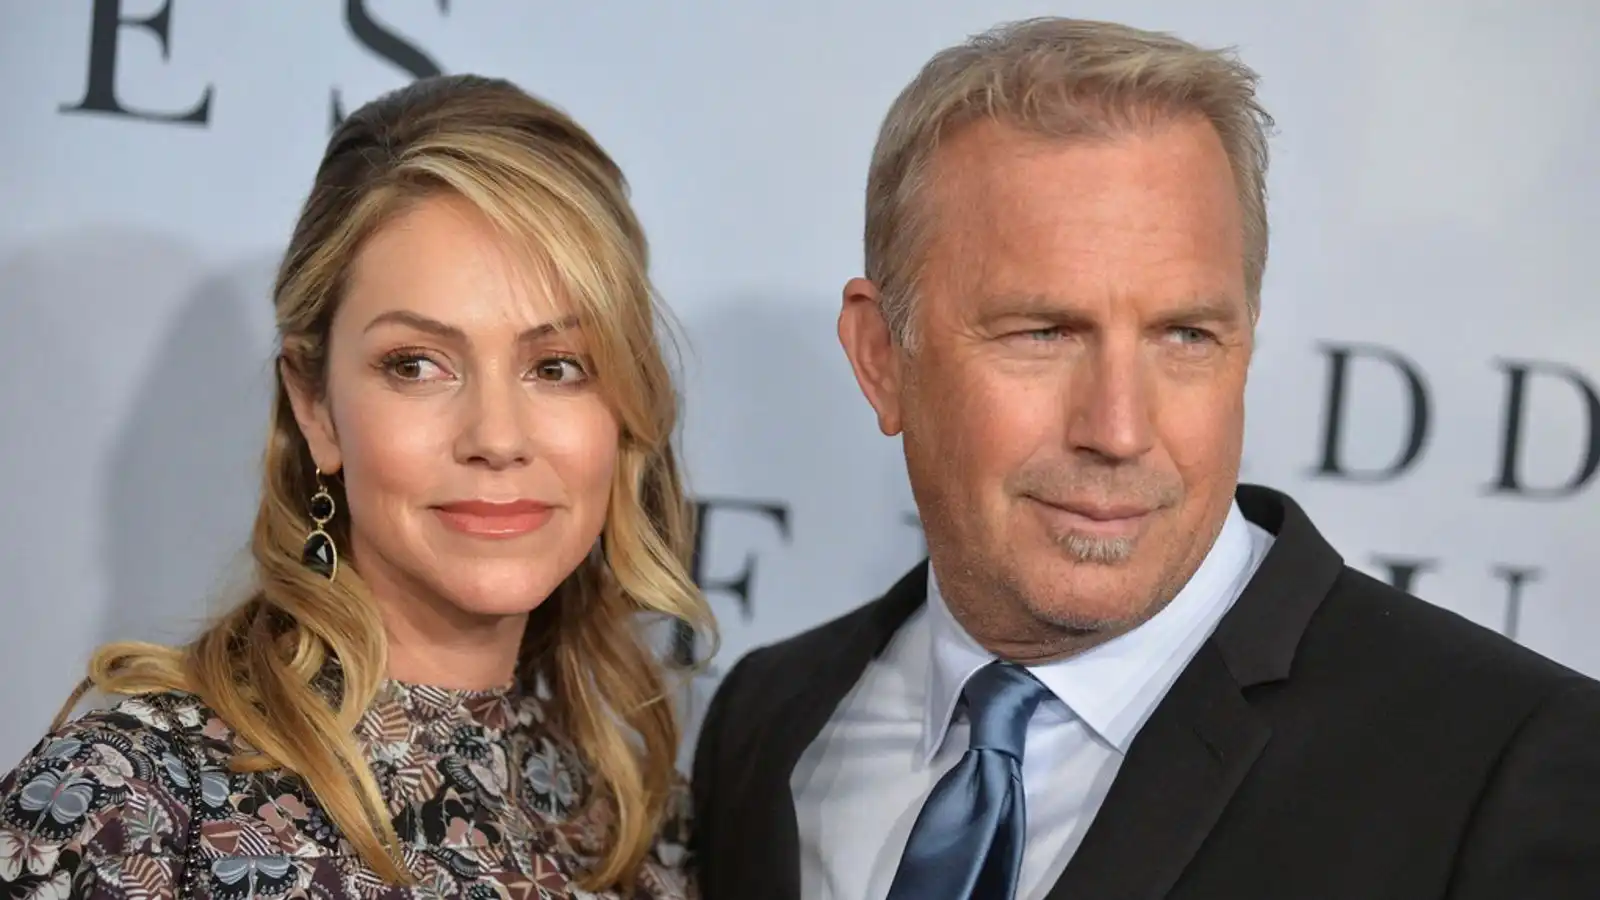 Kevin Costner Opens Up About Challenging Divorce And Child Support Victory